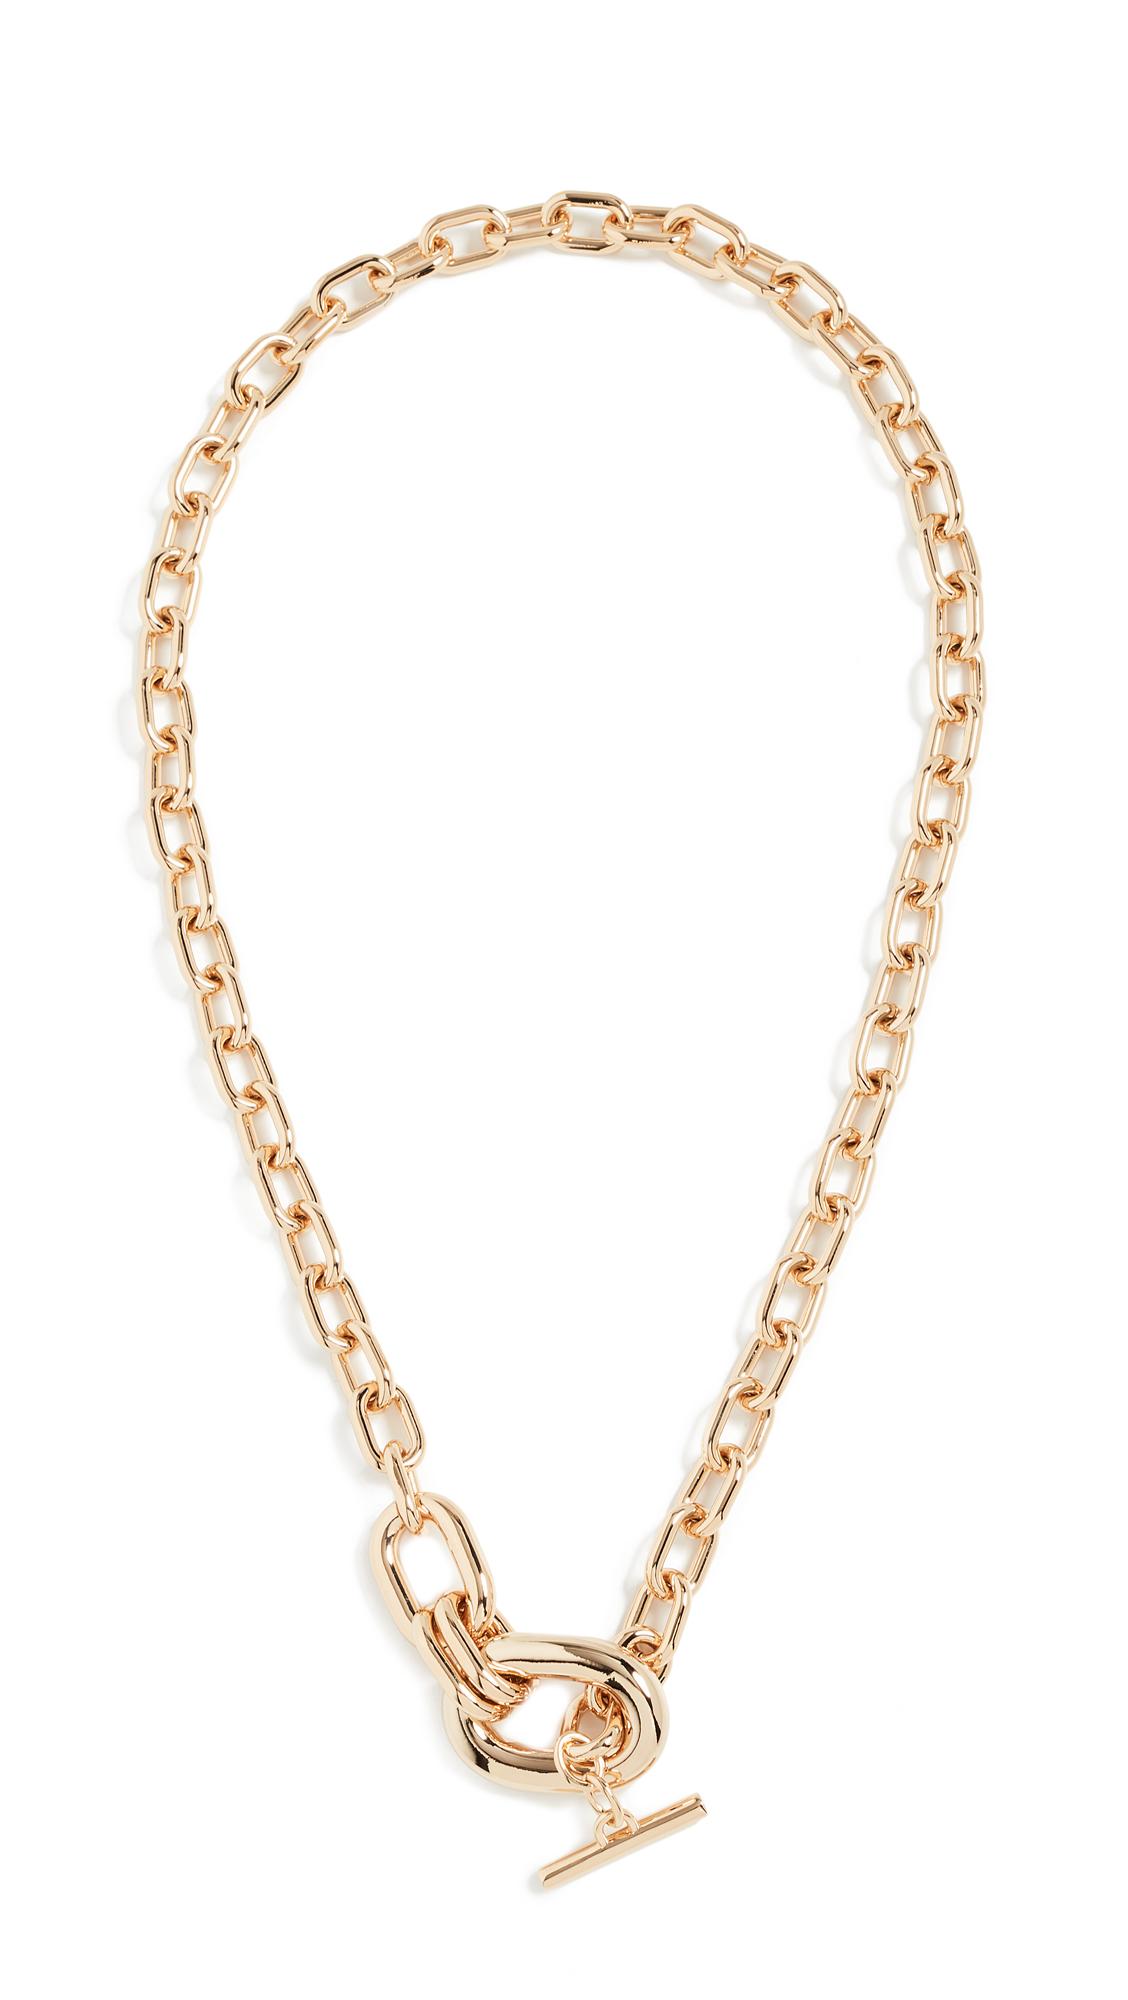 Paco Rabanne Xl Link Pendant Necklace in Gold (Metallic) - Lyst